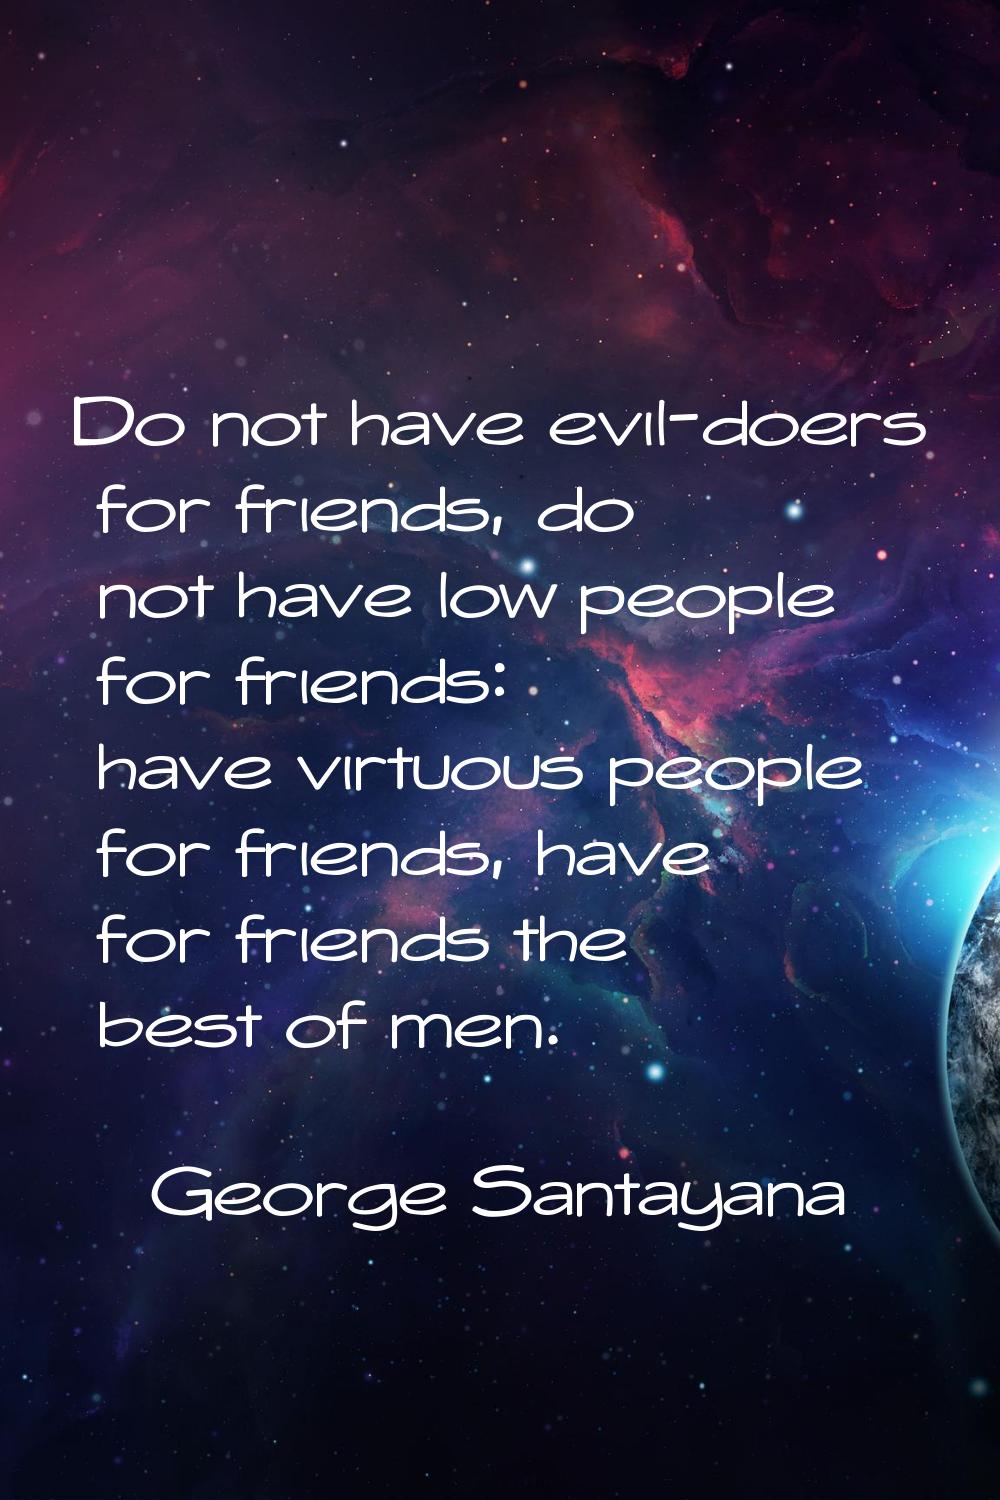 Do not have evil-doers for friends, do not have low people for friends: have virtuous people for fr